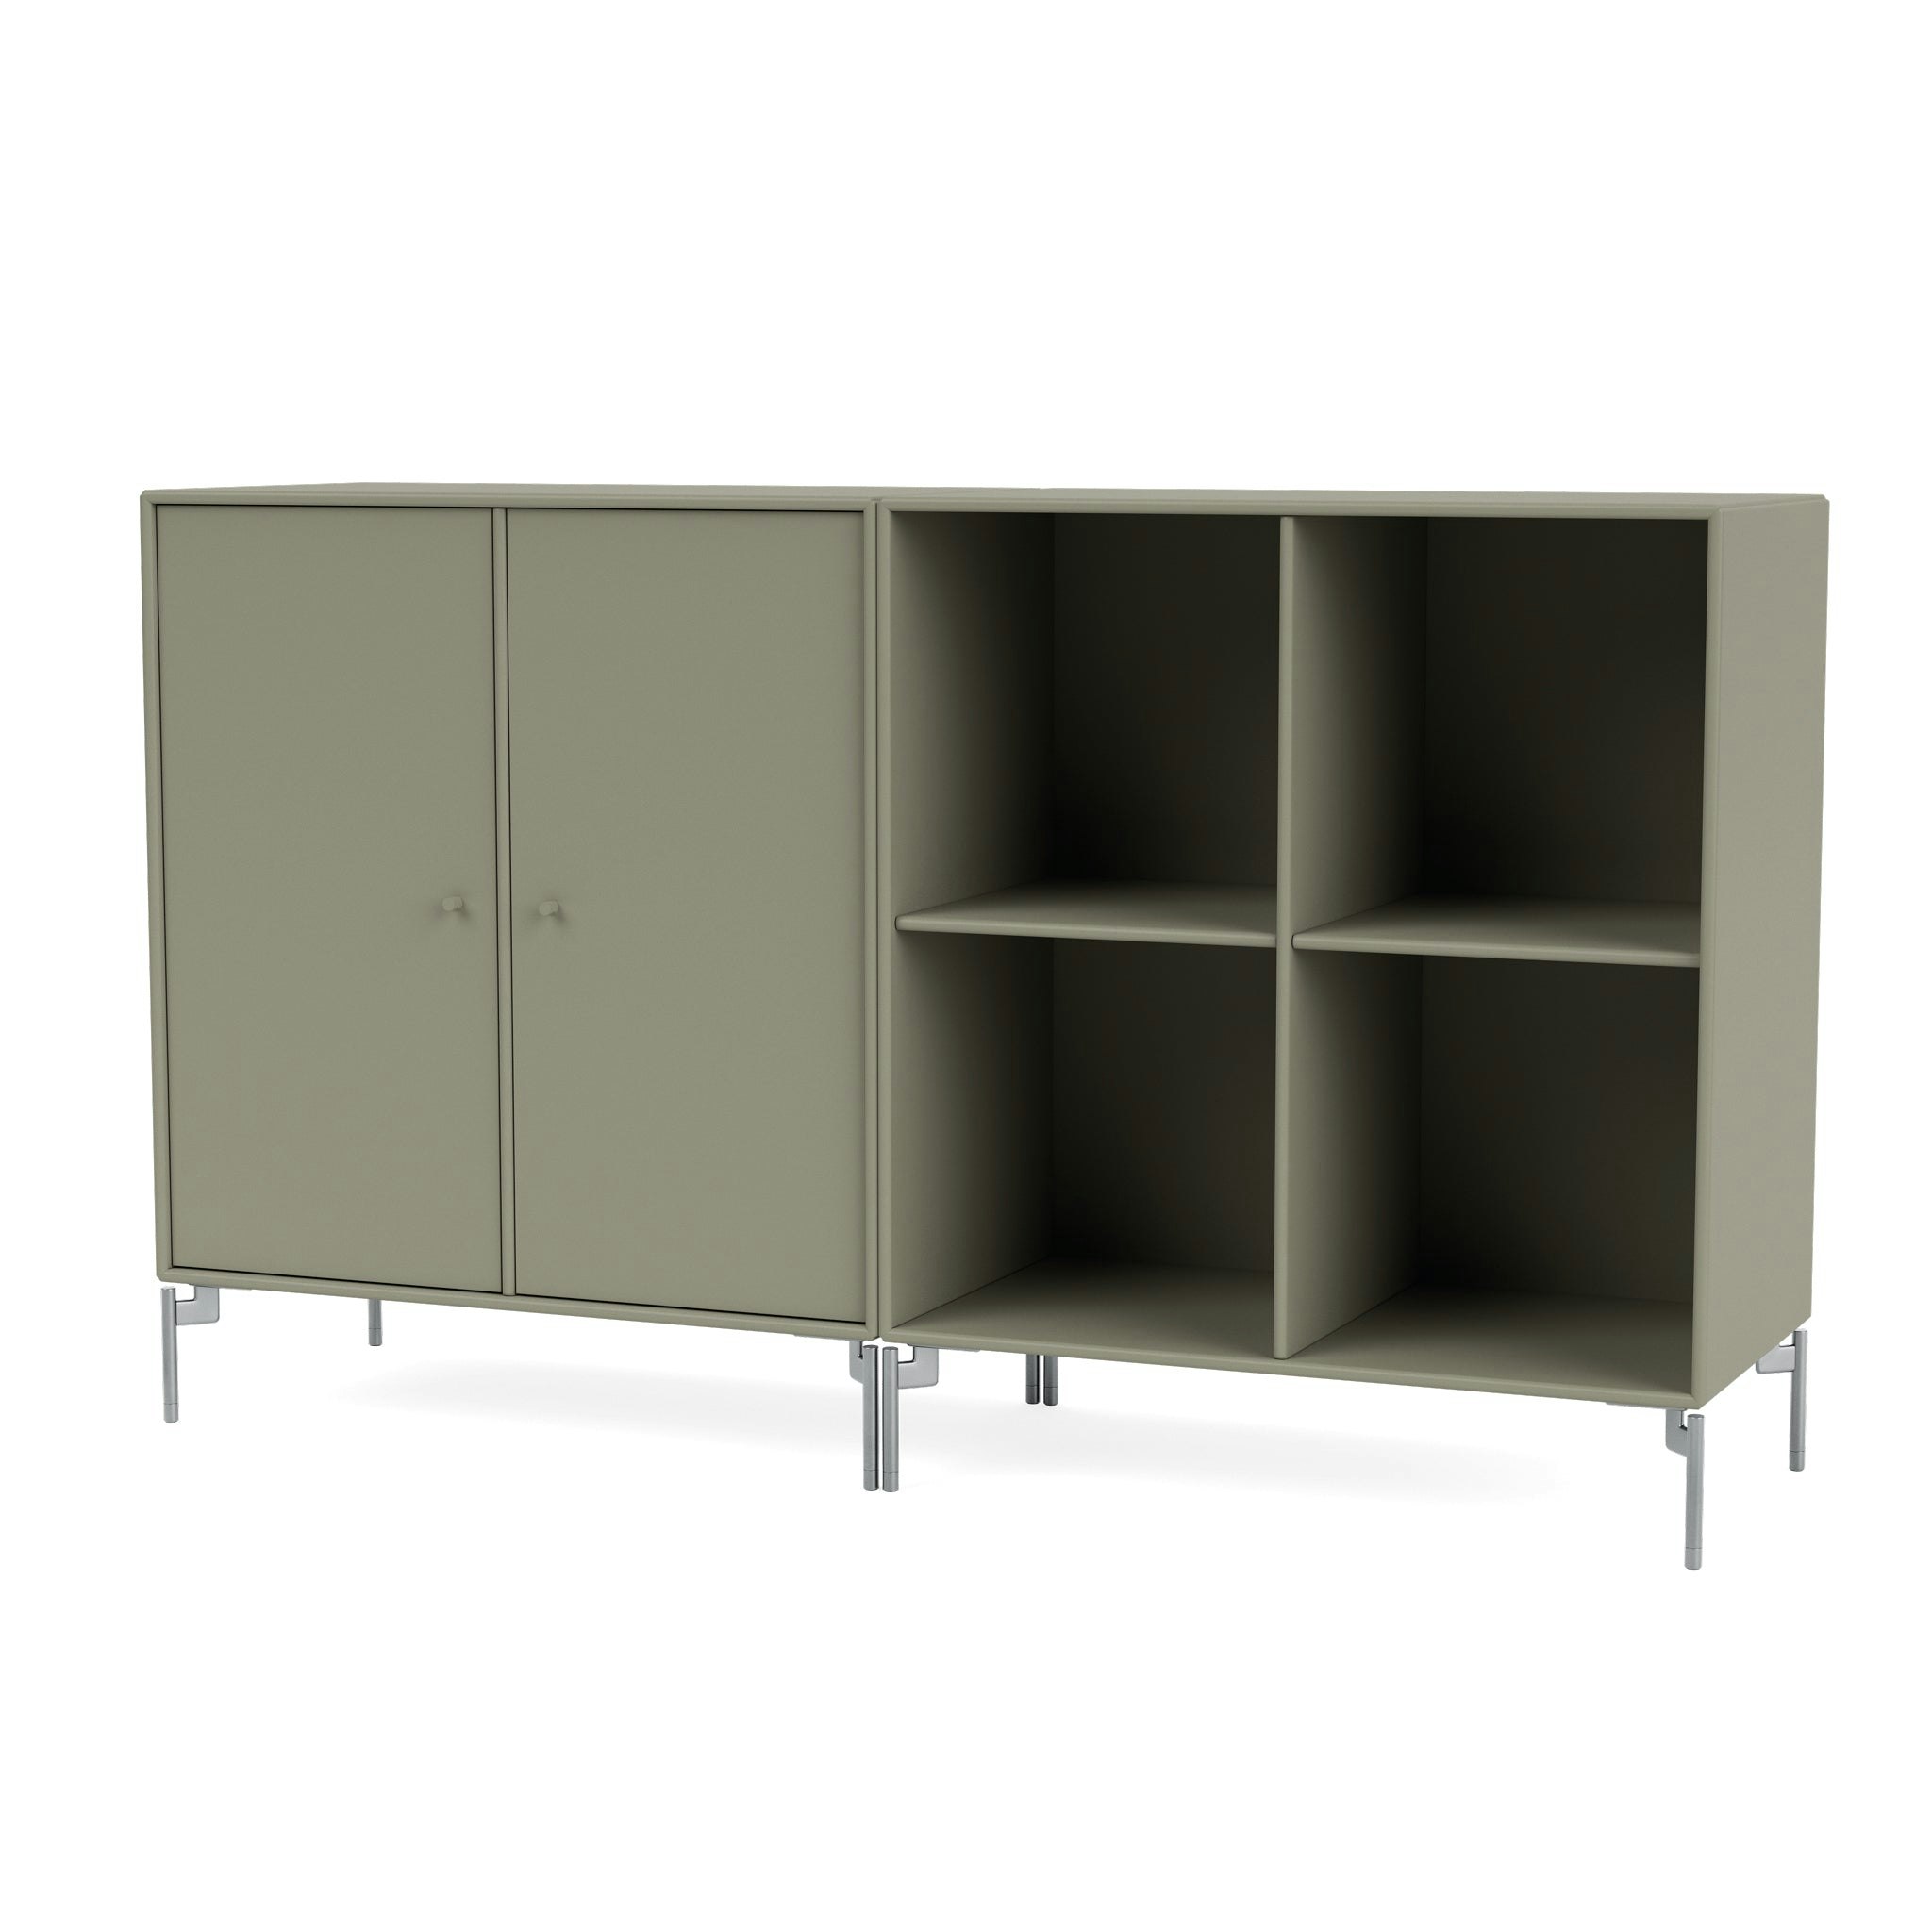 Pair Sideboard by Montana Furniture